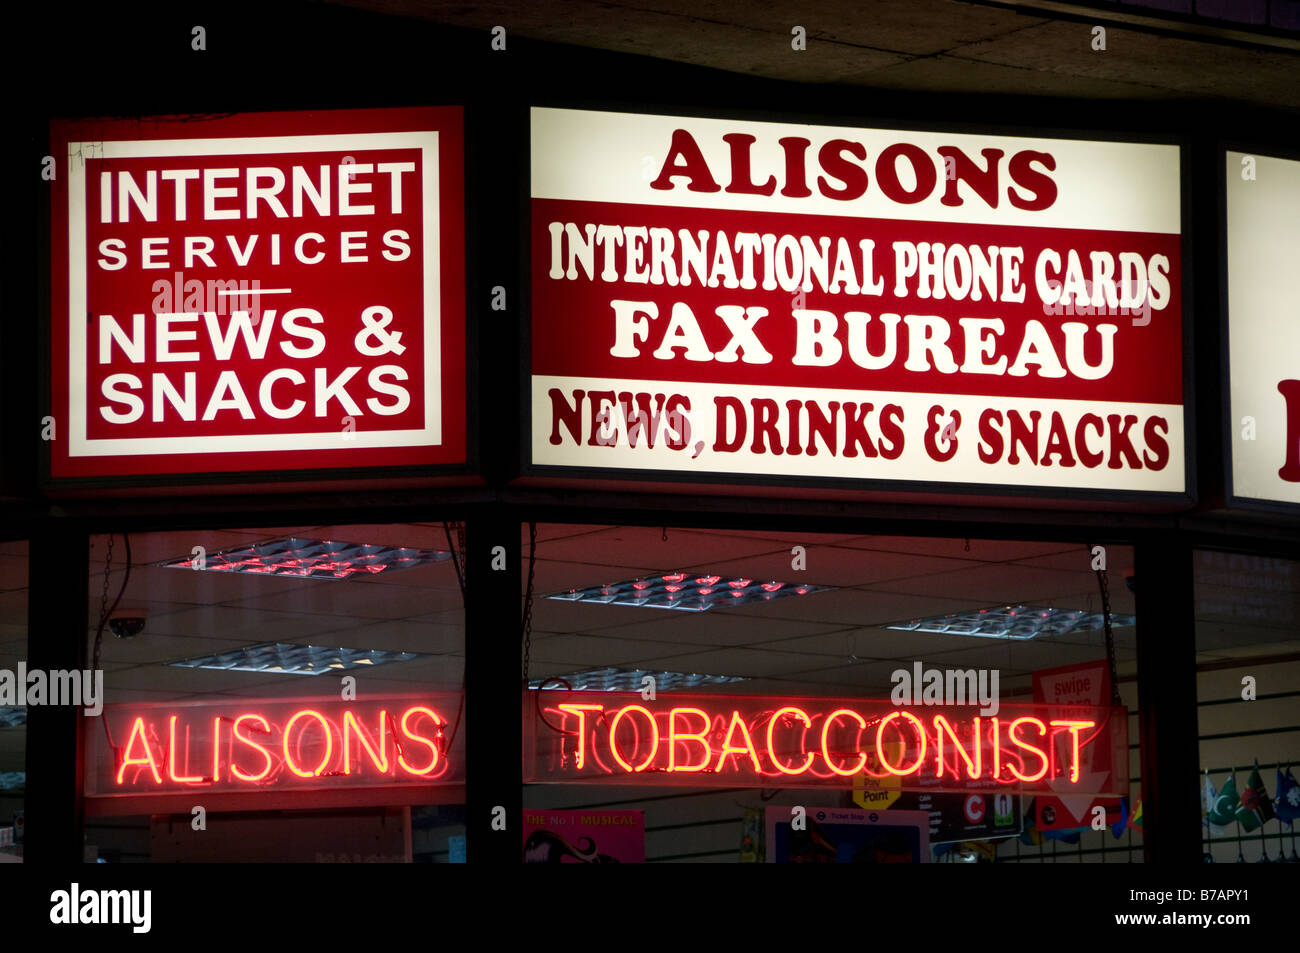 Alisons international phone cards fax bureau news drinks snacks internet services tobacco tabacconist Stock Photo